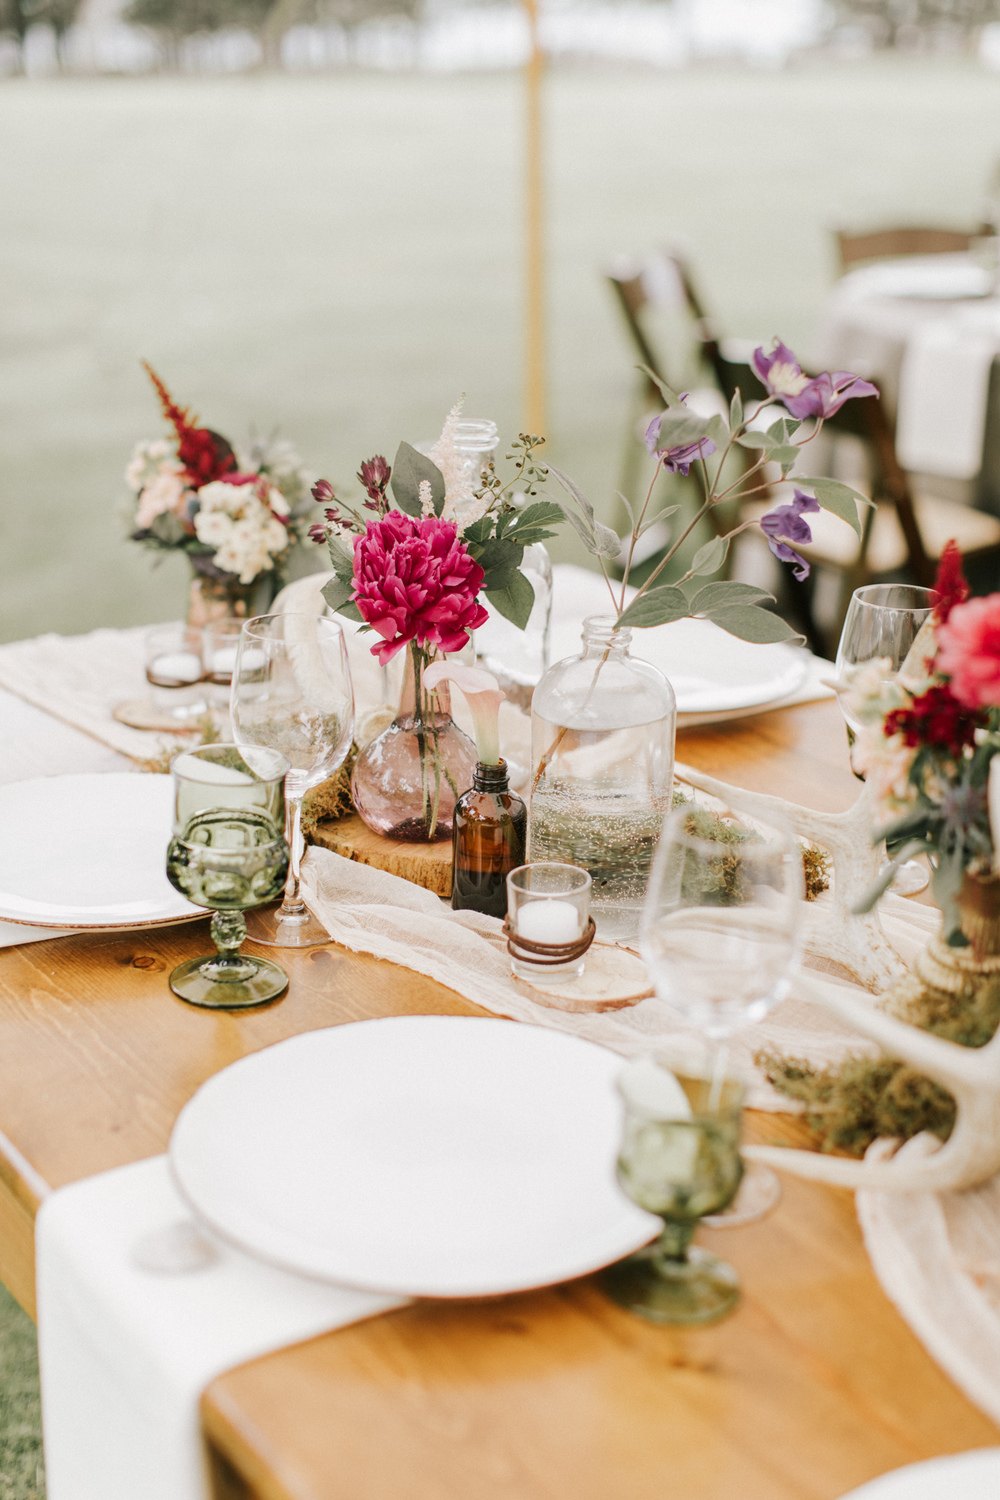 A Lakeside Cabin Wedding with Notable Deer Guests ⋆ Ruffled